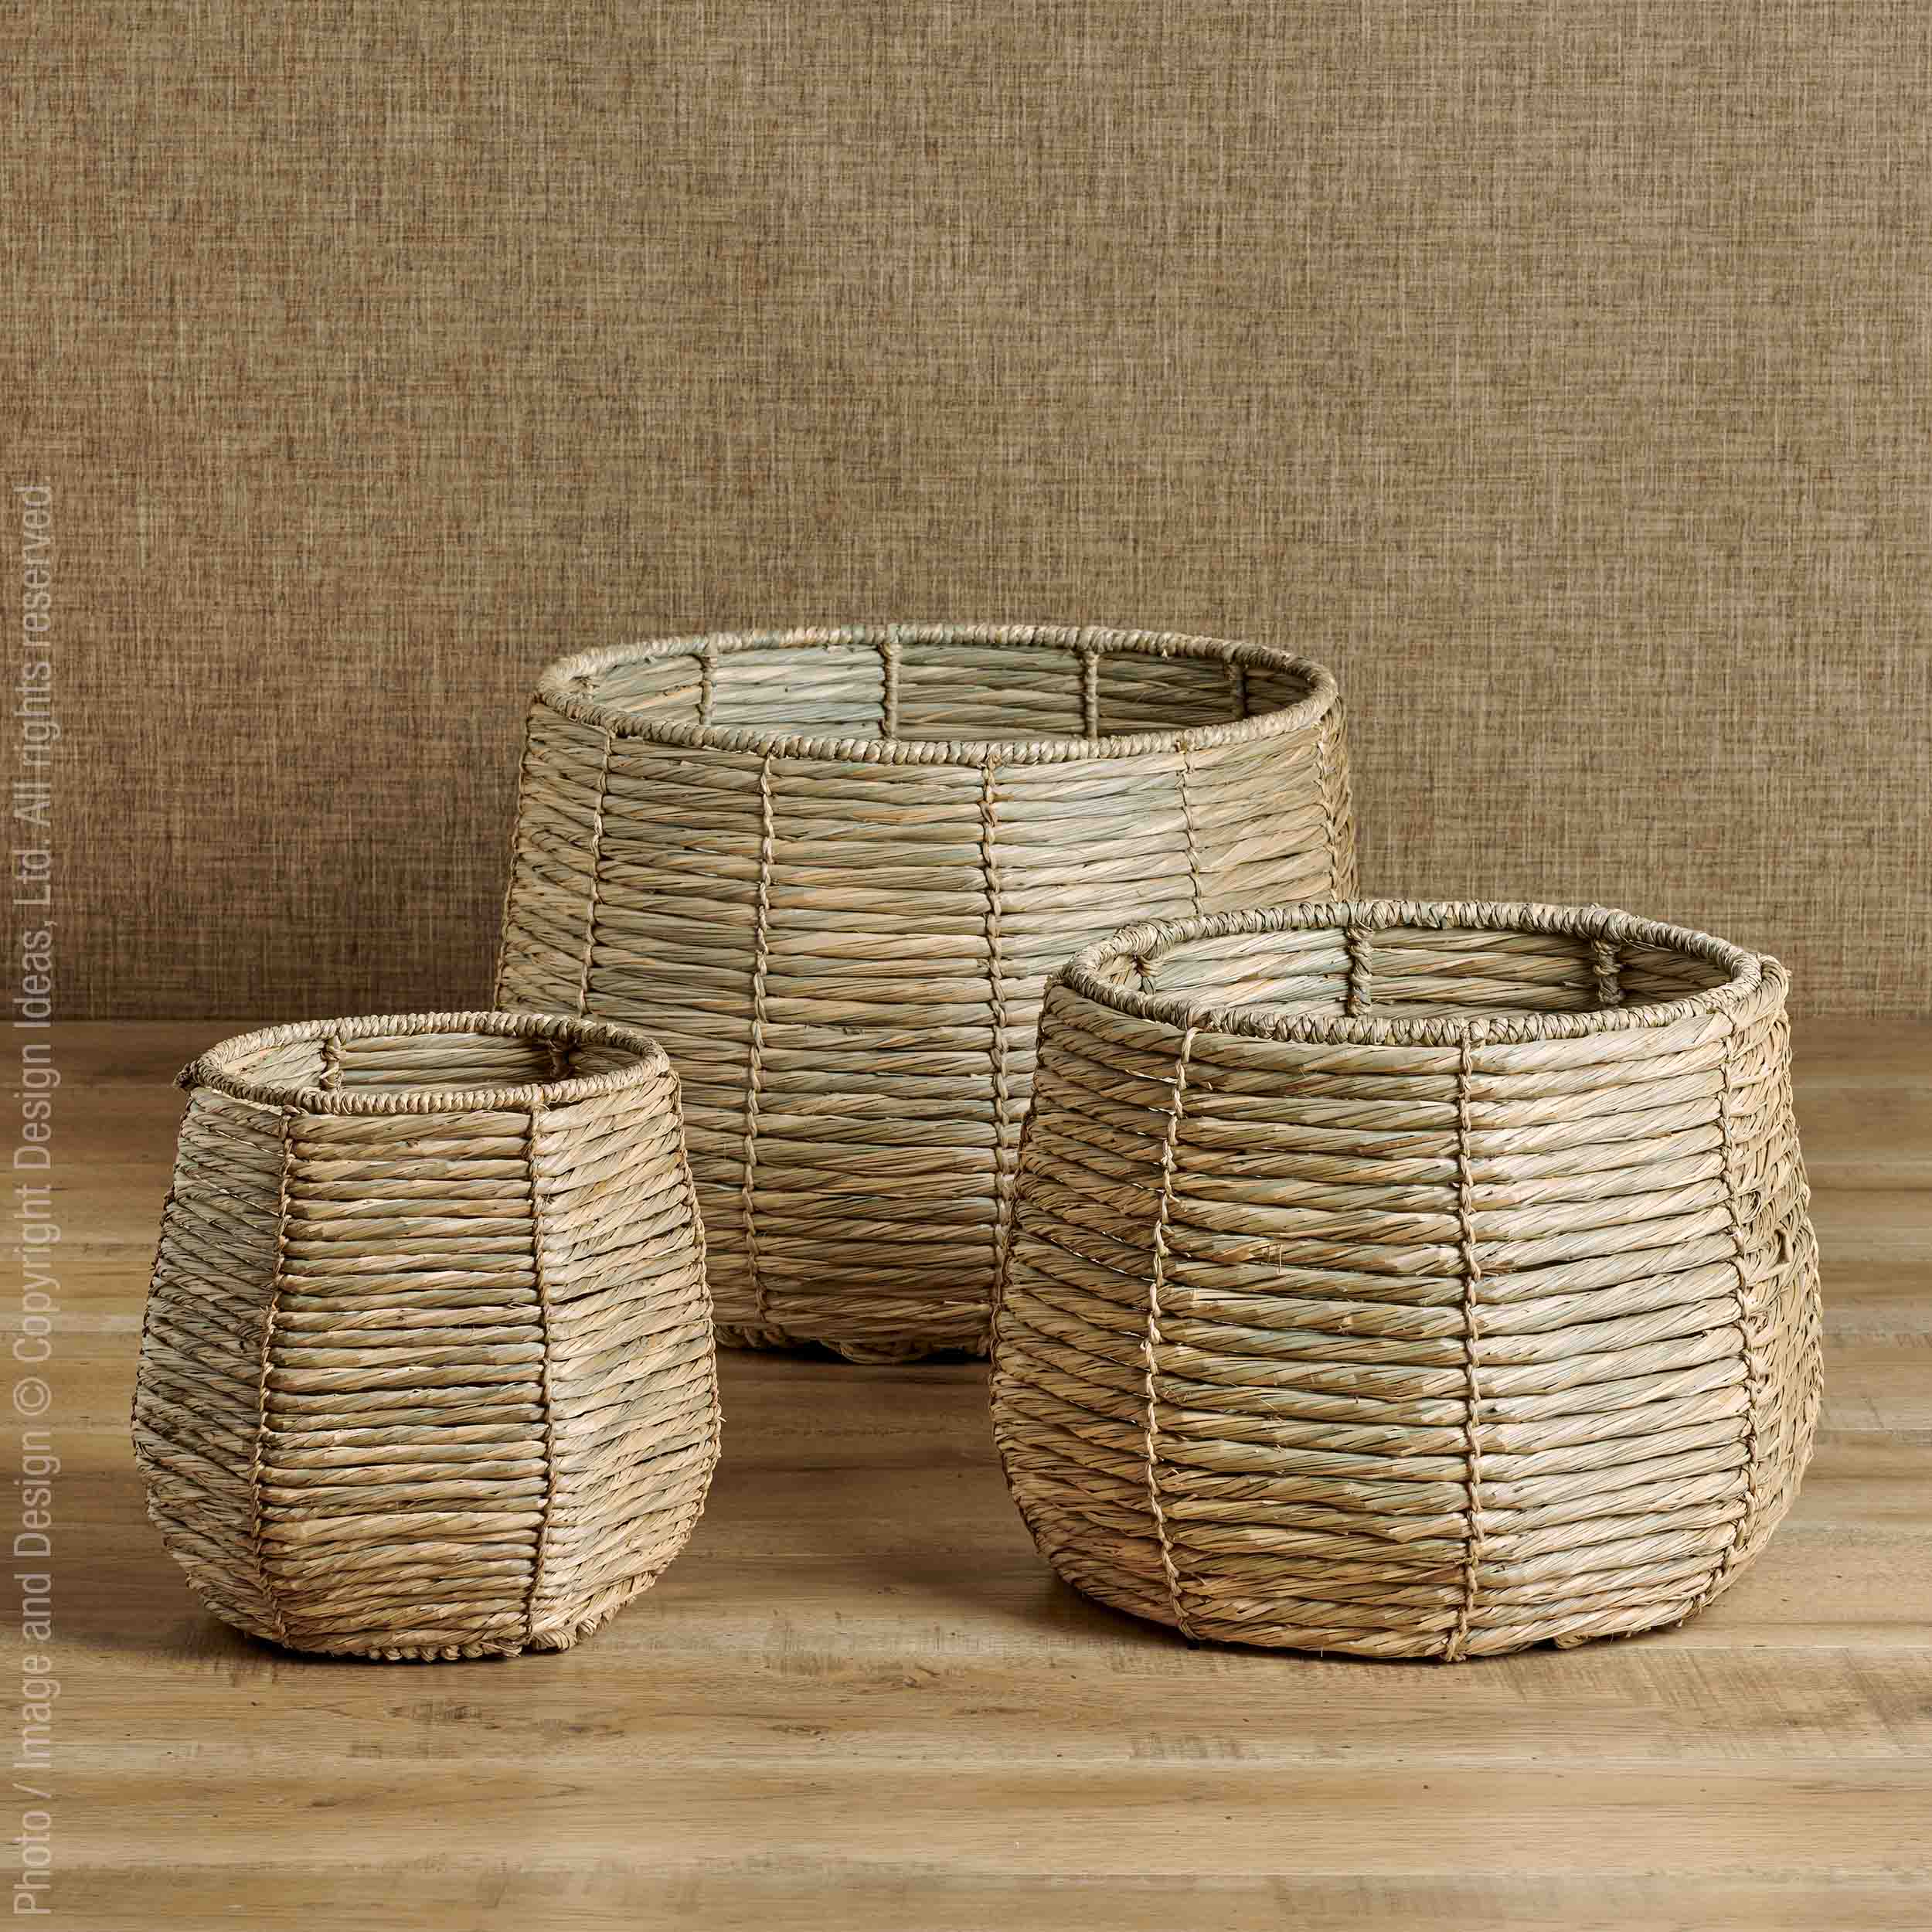 Pesaro™ baskets - Natural | Image 1 | Premium Basket from the Pesaro collection | made with Water Hyacinth Twine for long lasting use | texxture